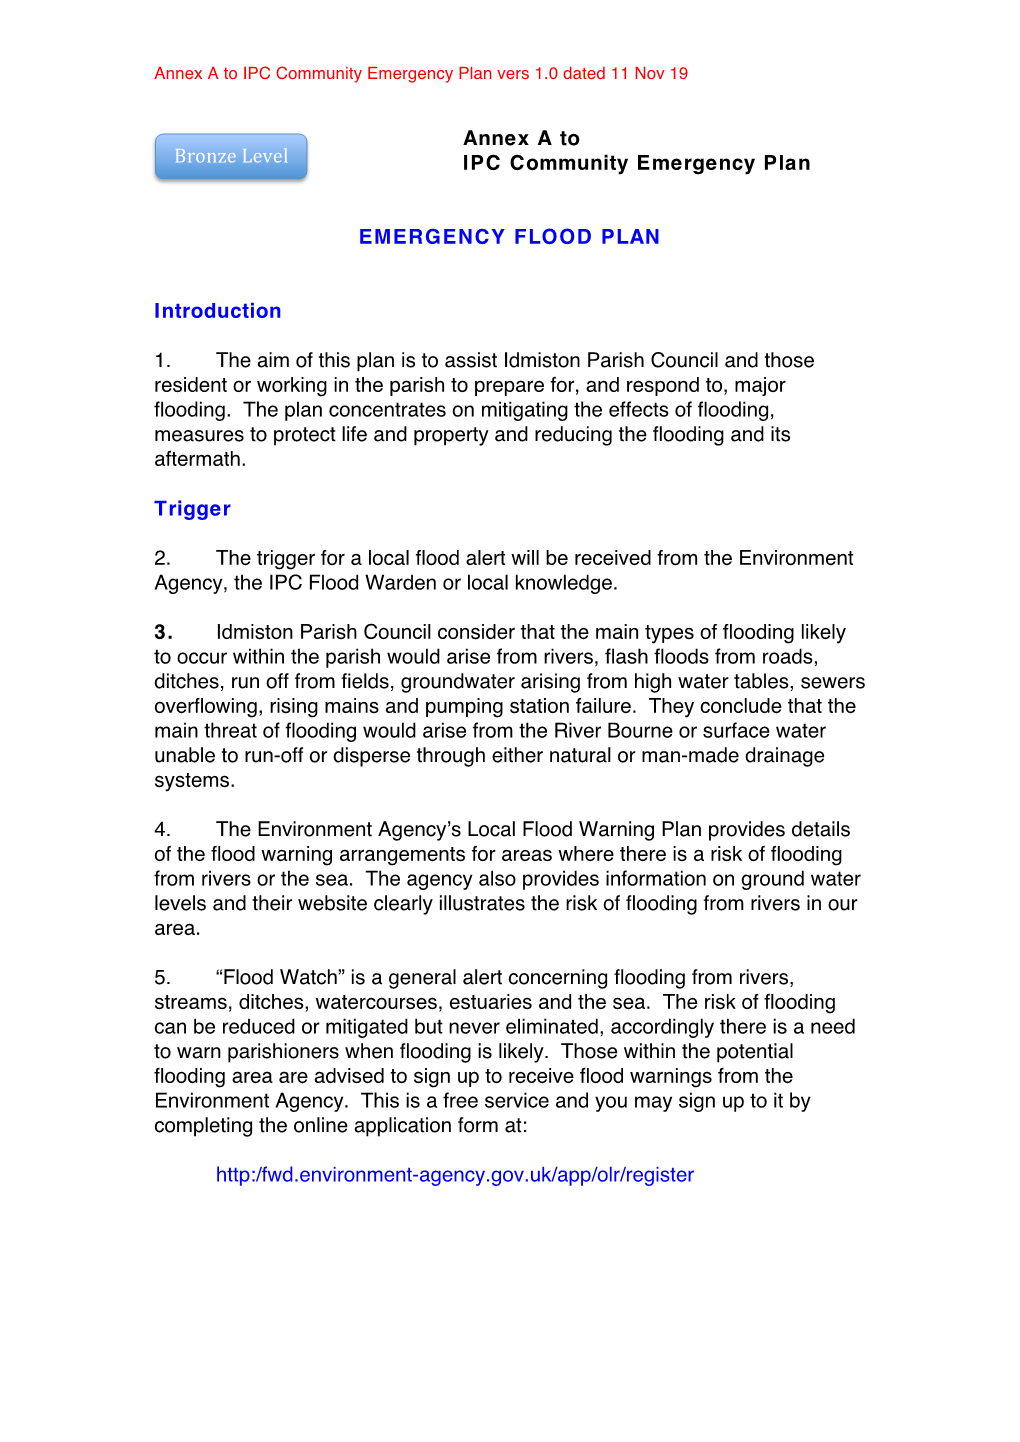 Annex a to IPC Community Emergency Plan EMERGENCY FLOOD PLAN Introduction 1. the Aim of This Plan Is to Assist Idmiston Parish C